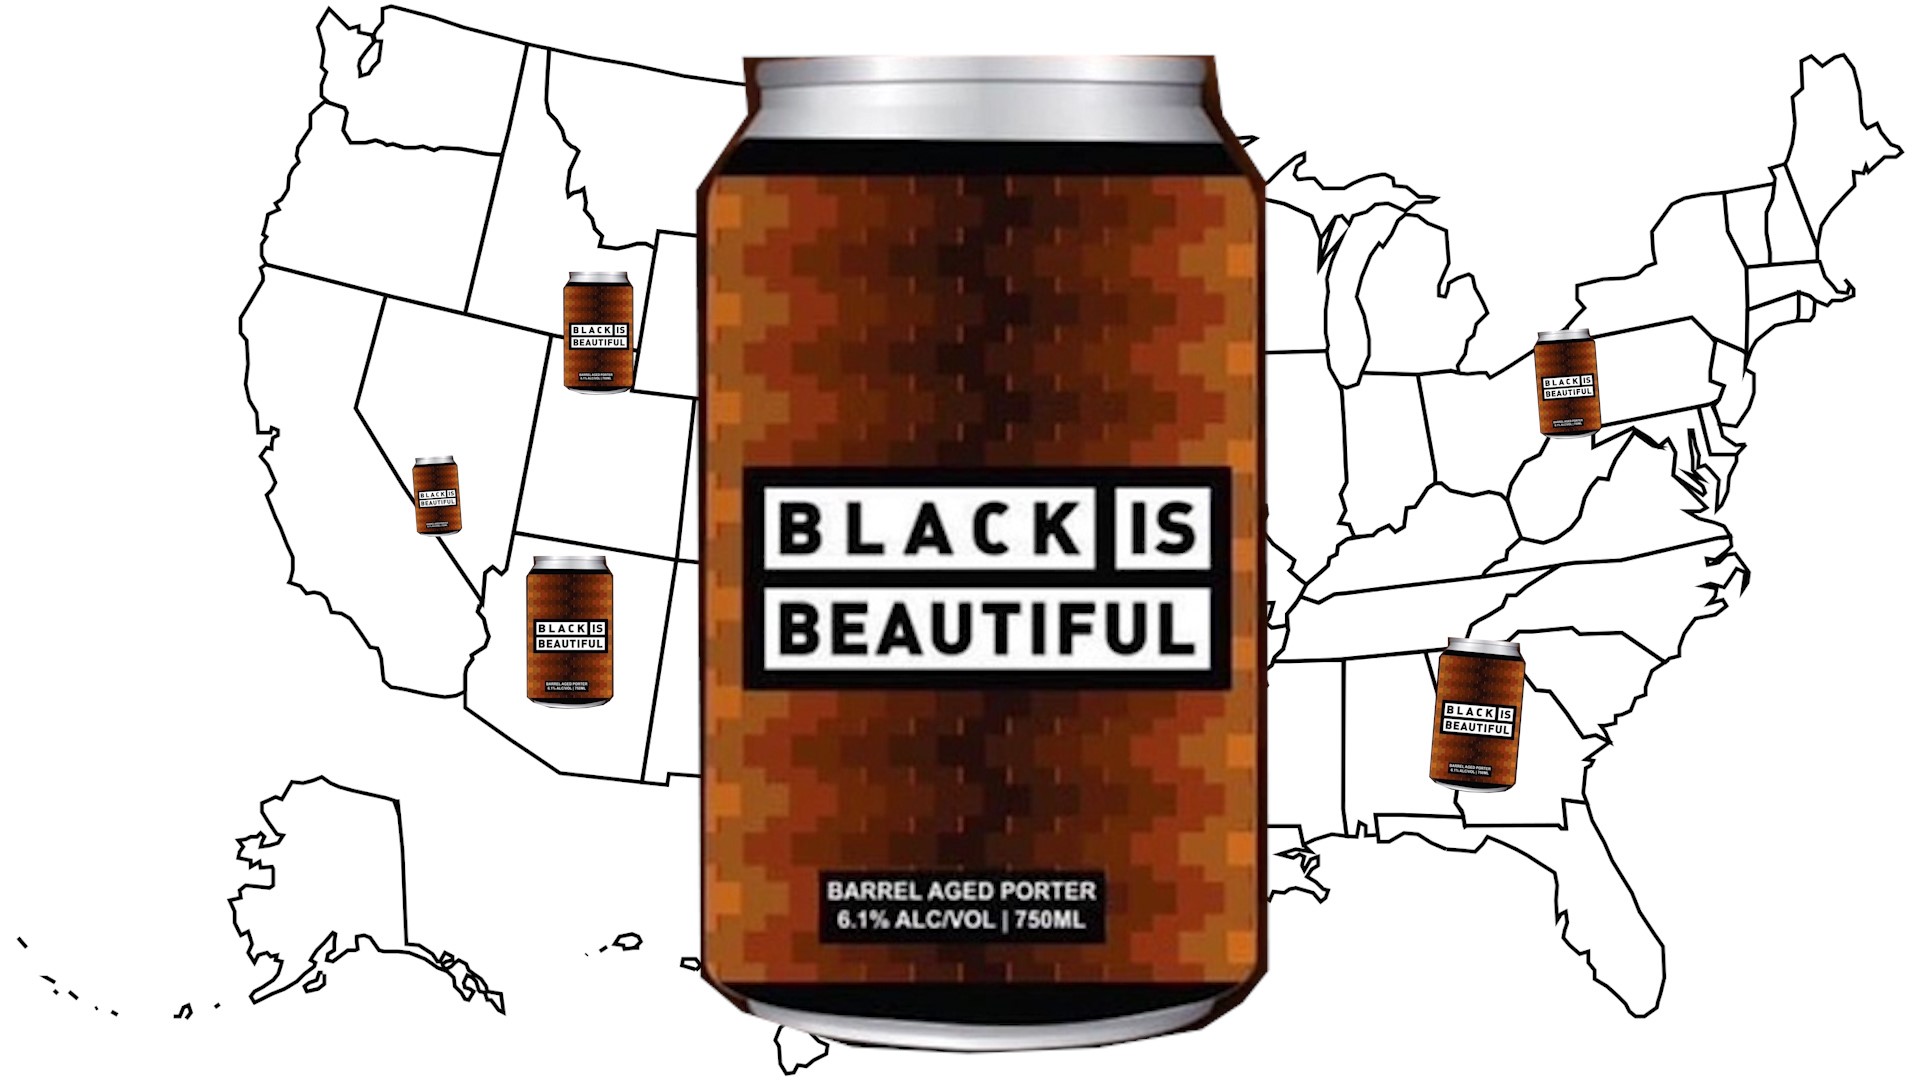 Black is Beautiful stout will be brewed by more than 500 breweries nationwide to bring awareness to racial injustice.